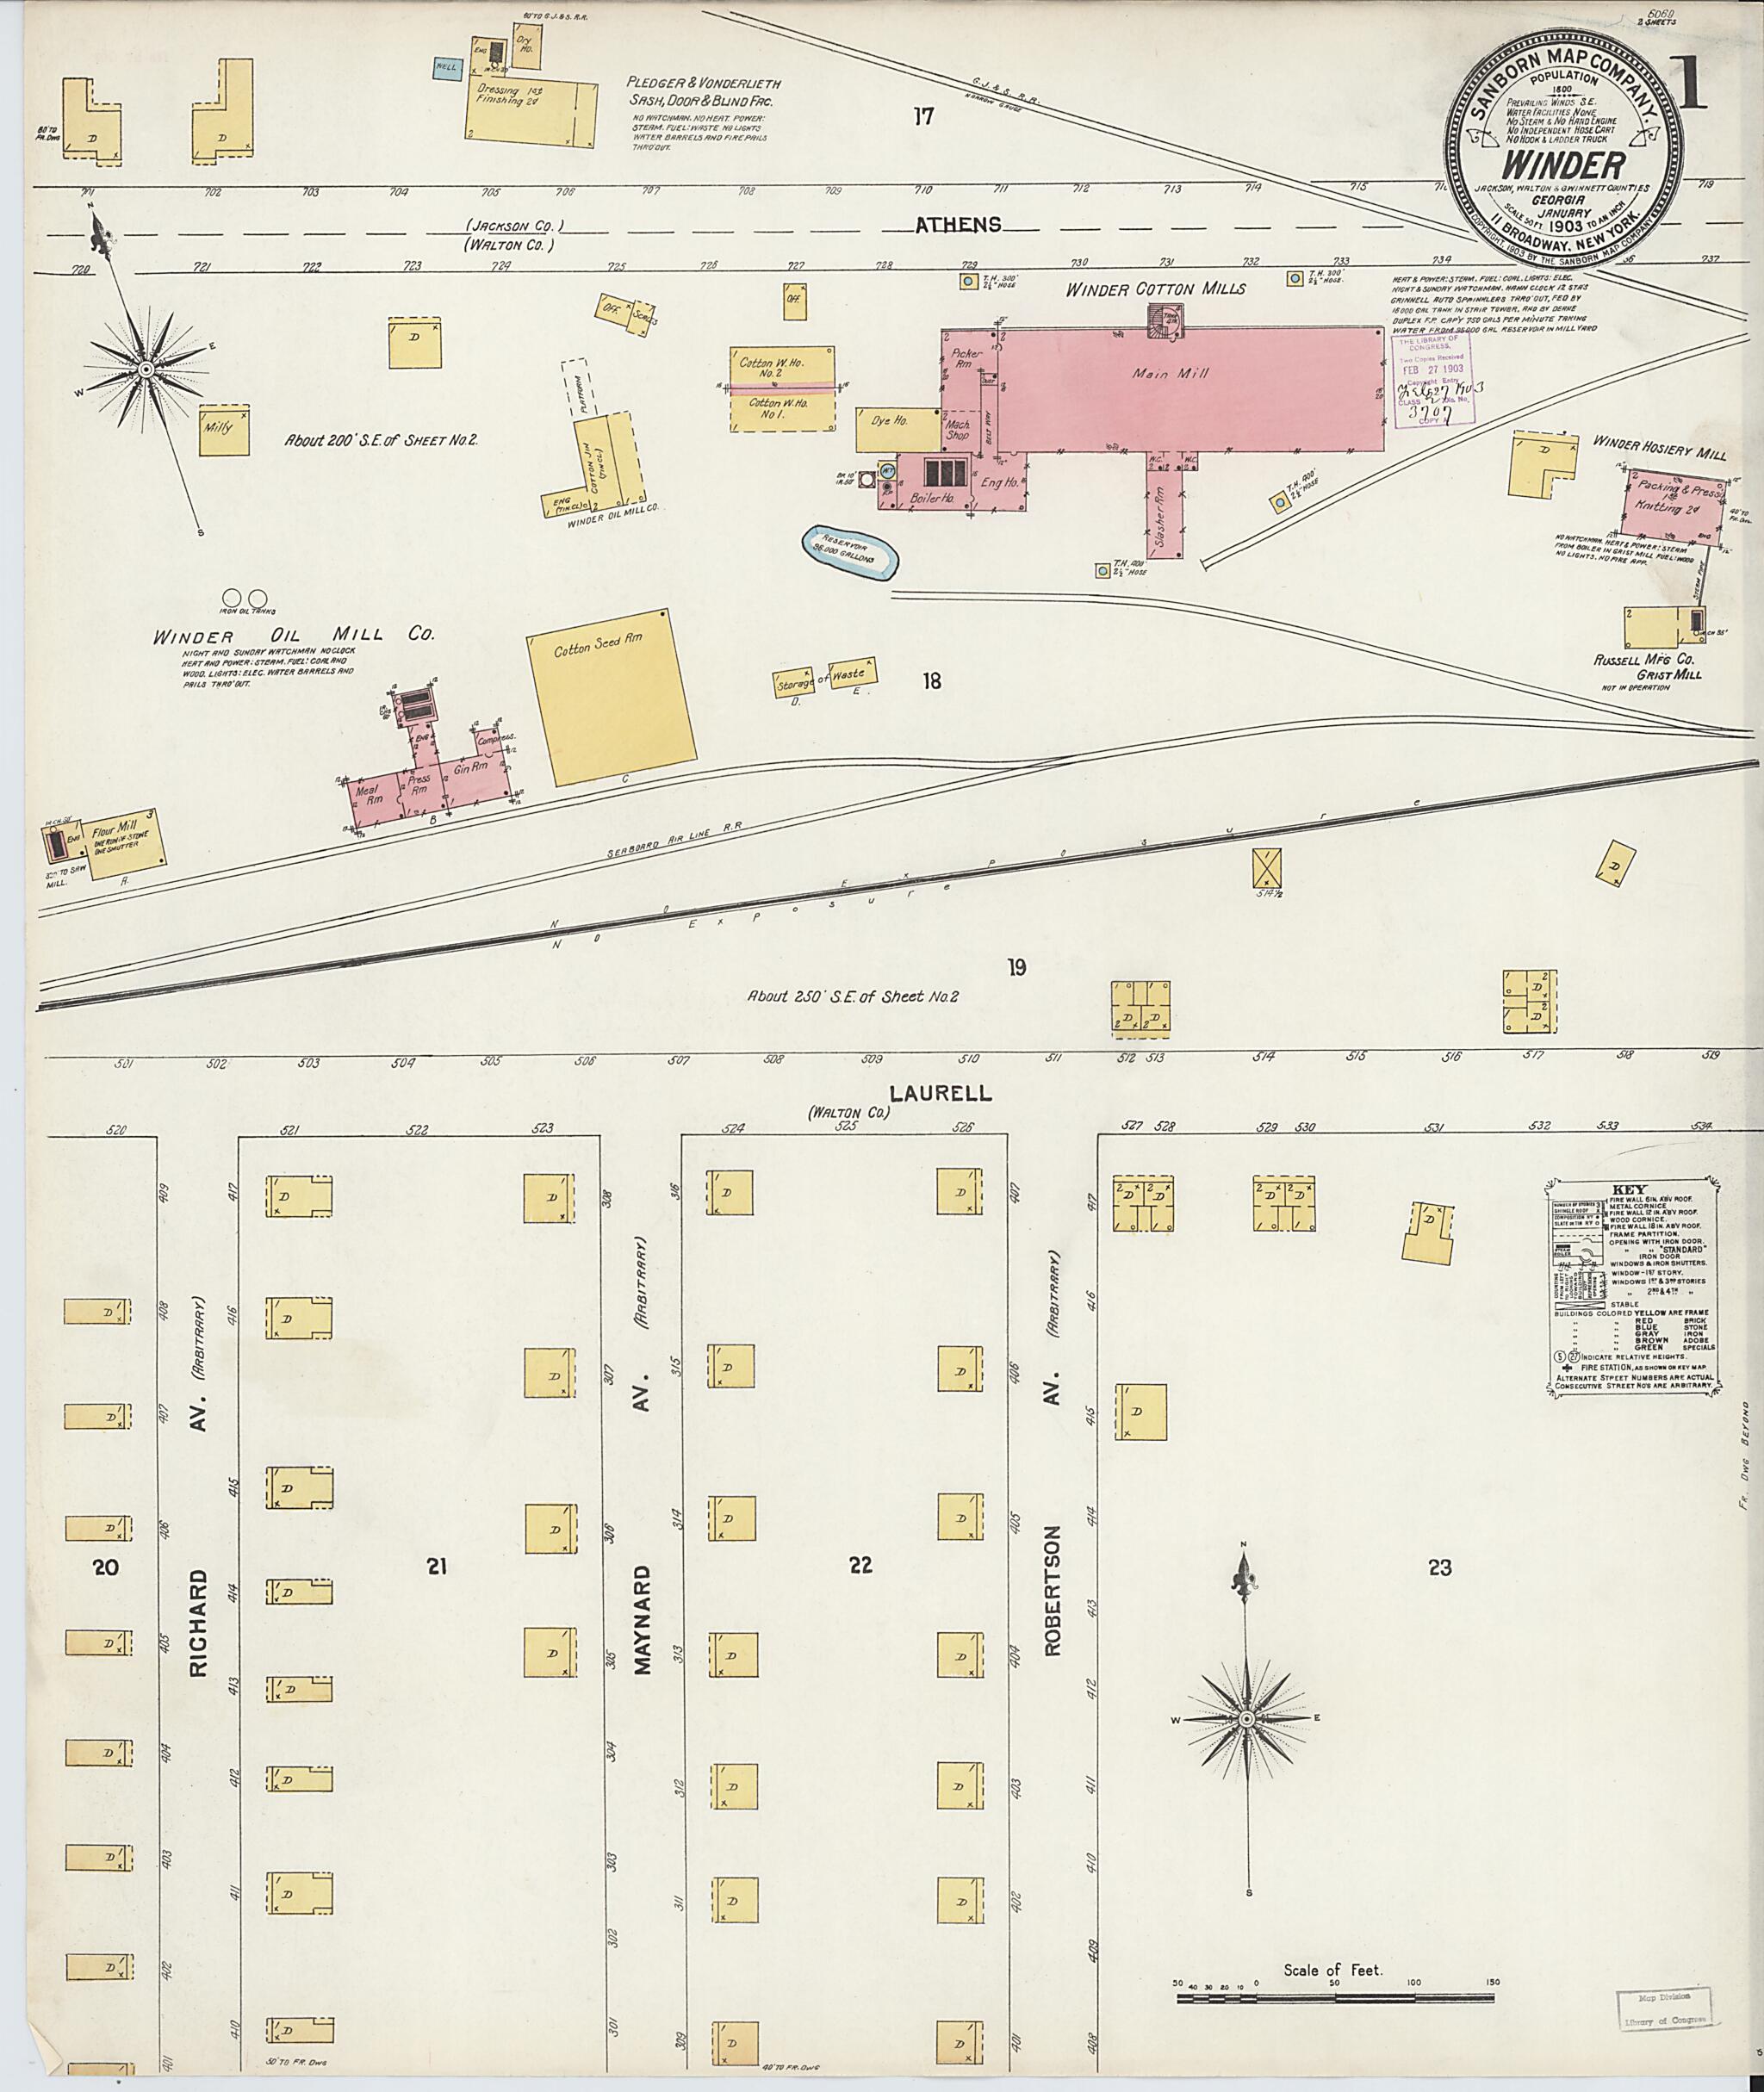 This old map of Winder, Barrow County, Georgia was created by Sanborn Map Company in 1903